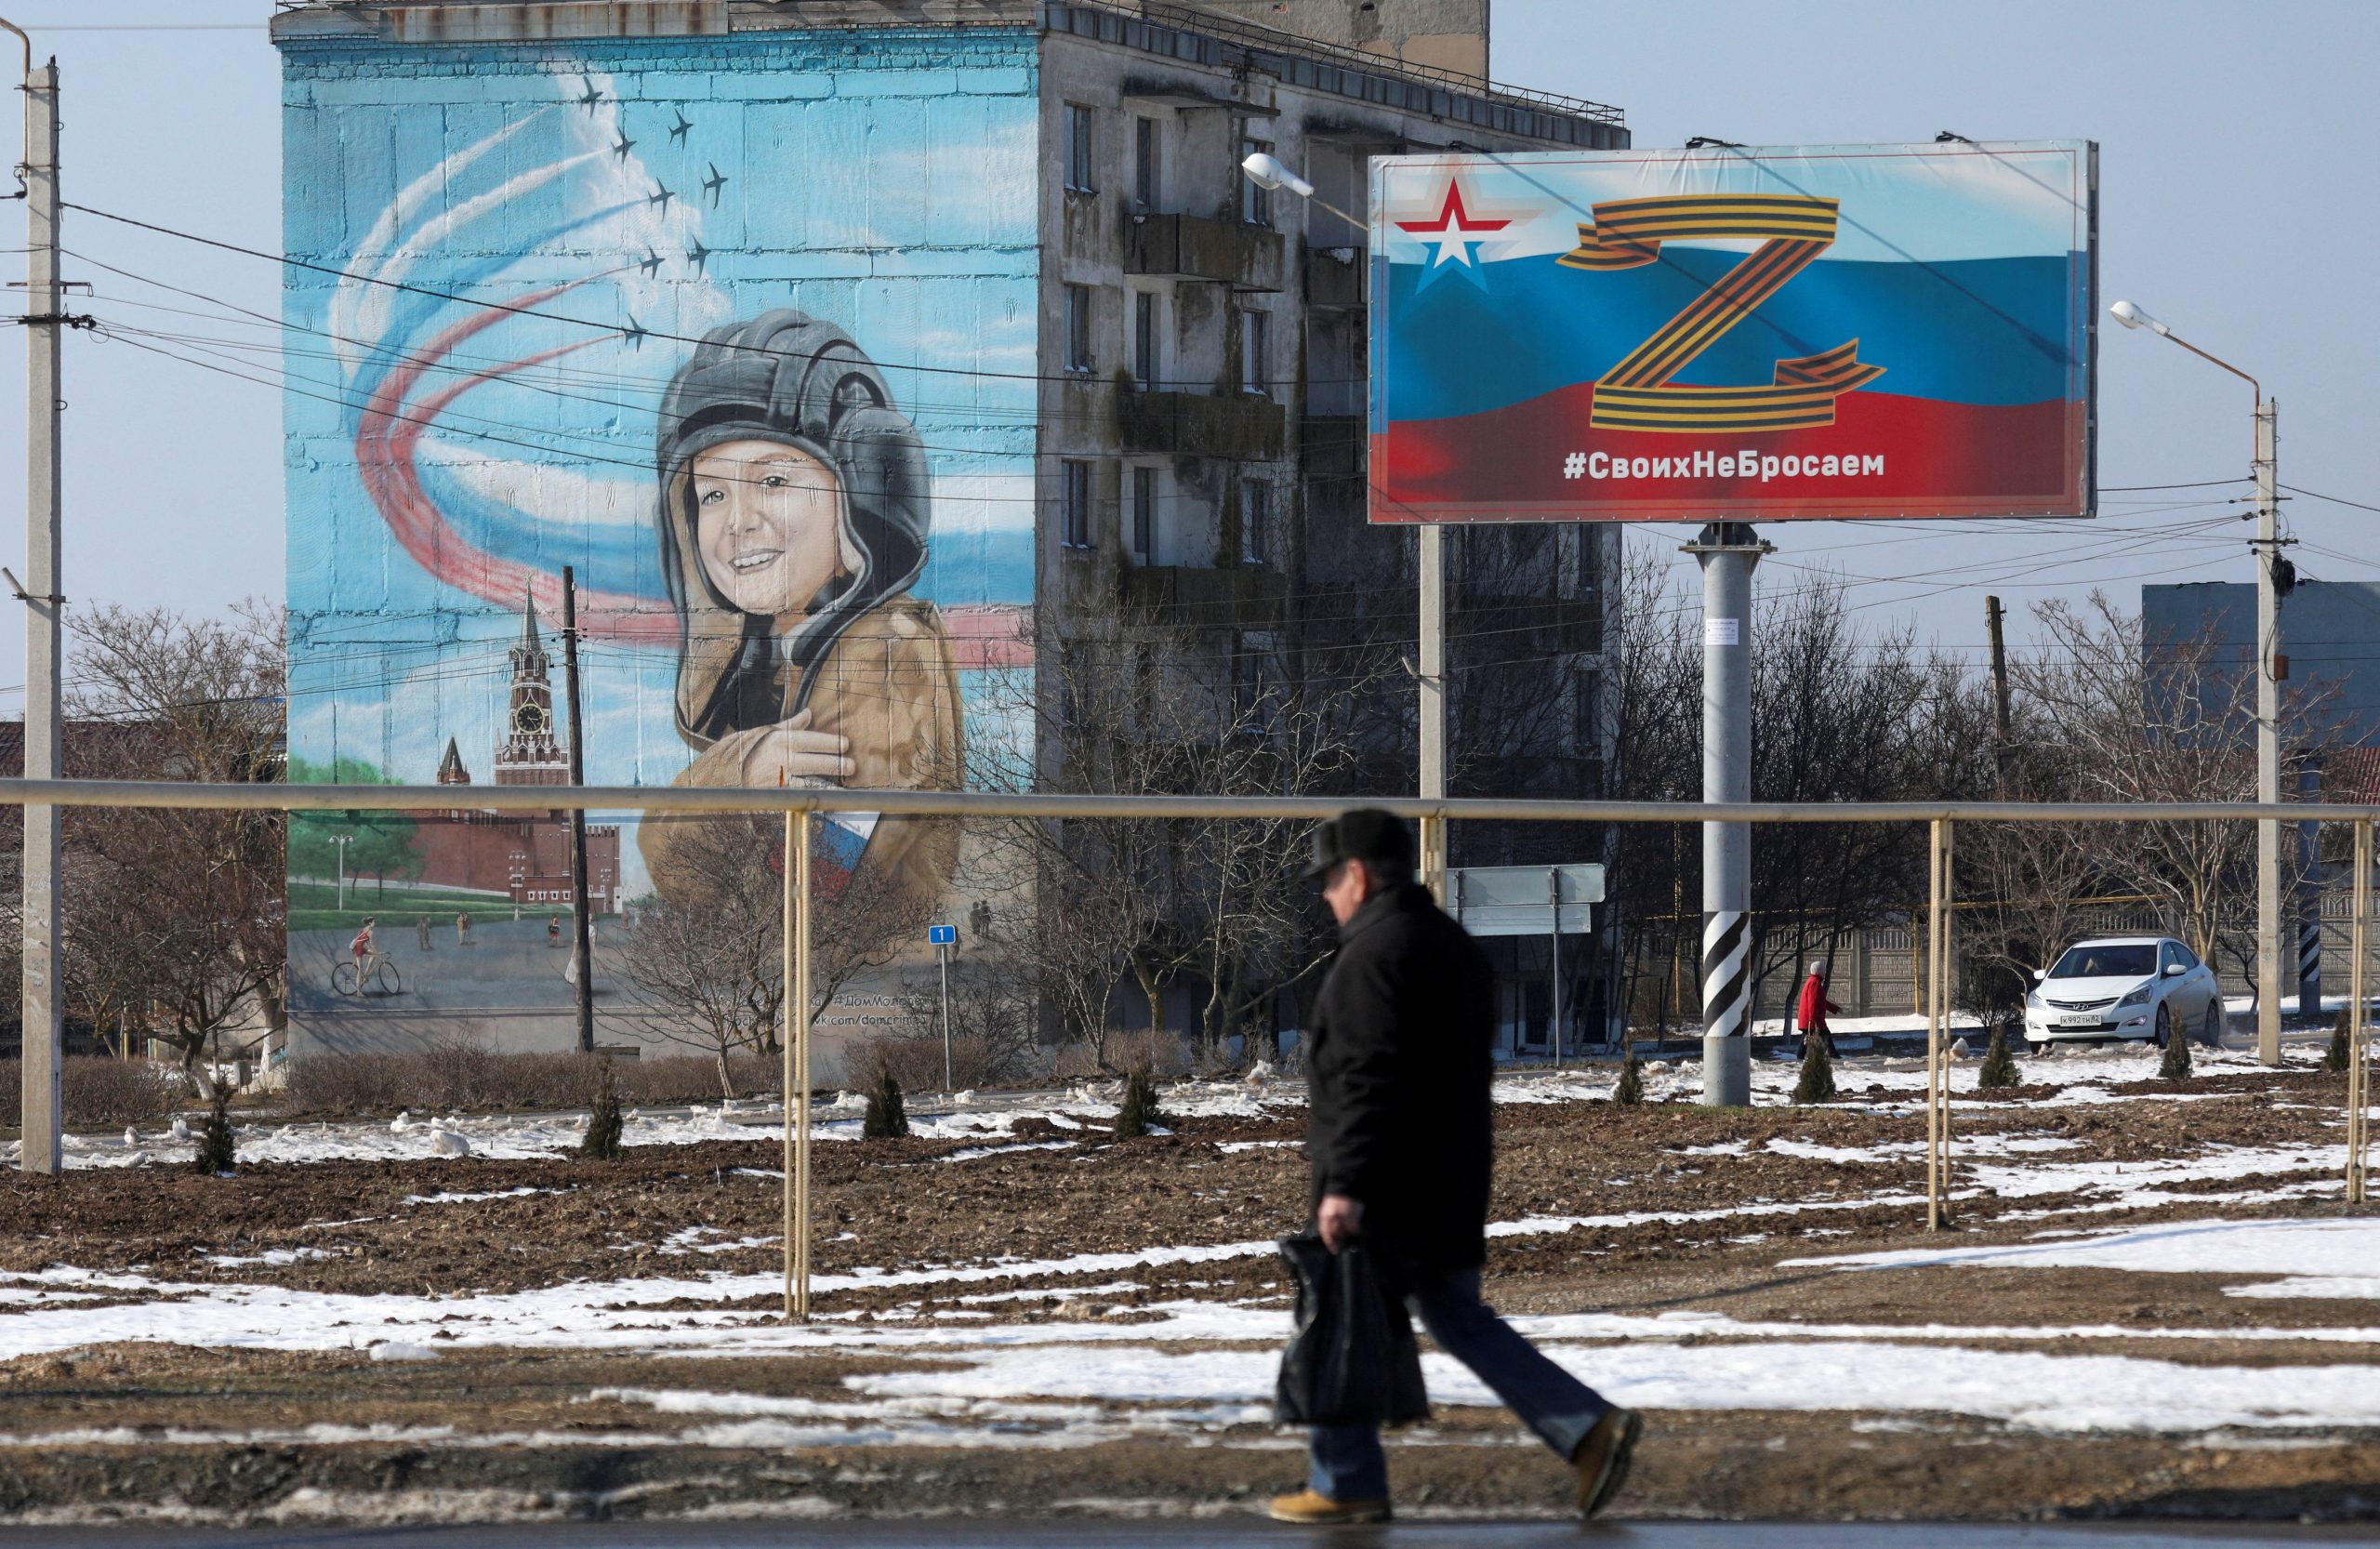 Photo: A pedestrian walks near a board, which displays the symbol "Z" in support of the Russian armed forces involved in the country's military campaign in Ukraine, in the settlement of Chernomorskoye, Crimea, February 11, 2023. A sign on the board reads: "We don't abandon our people". Credit: REUTERS/Alexey Pavlishak